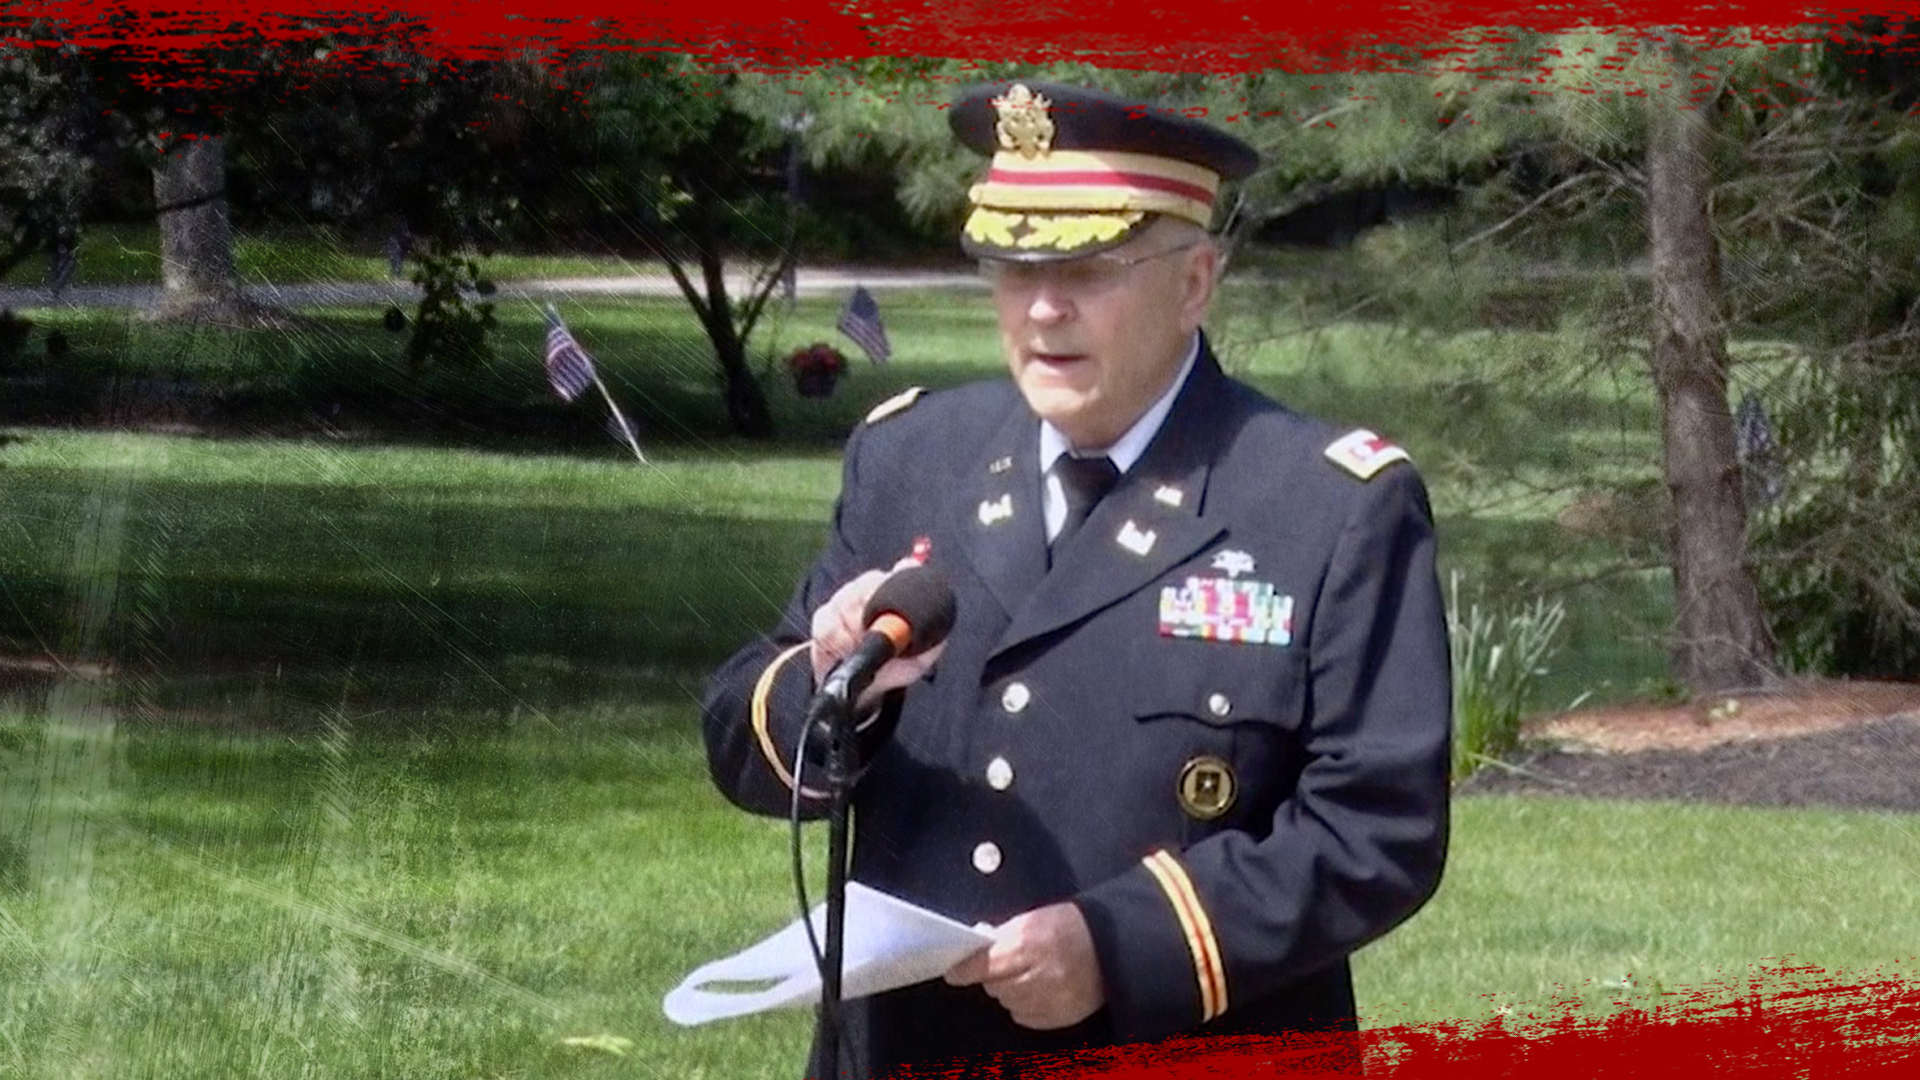 Two officials have resigned over censoring vet's Memorial Day speech